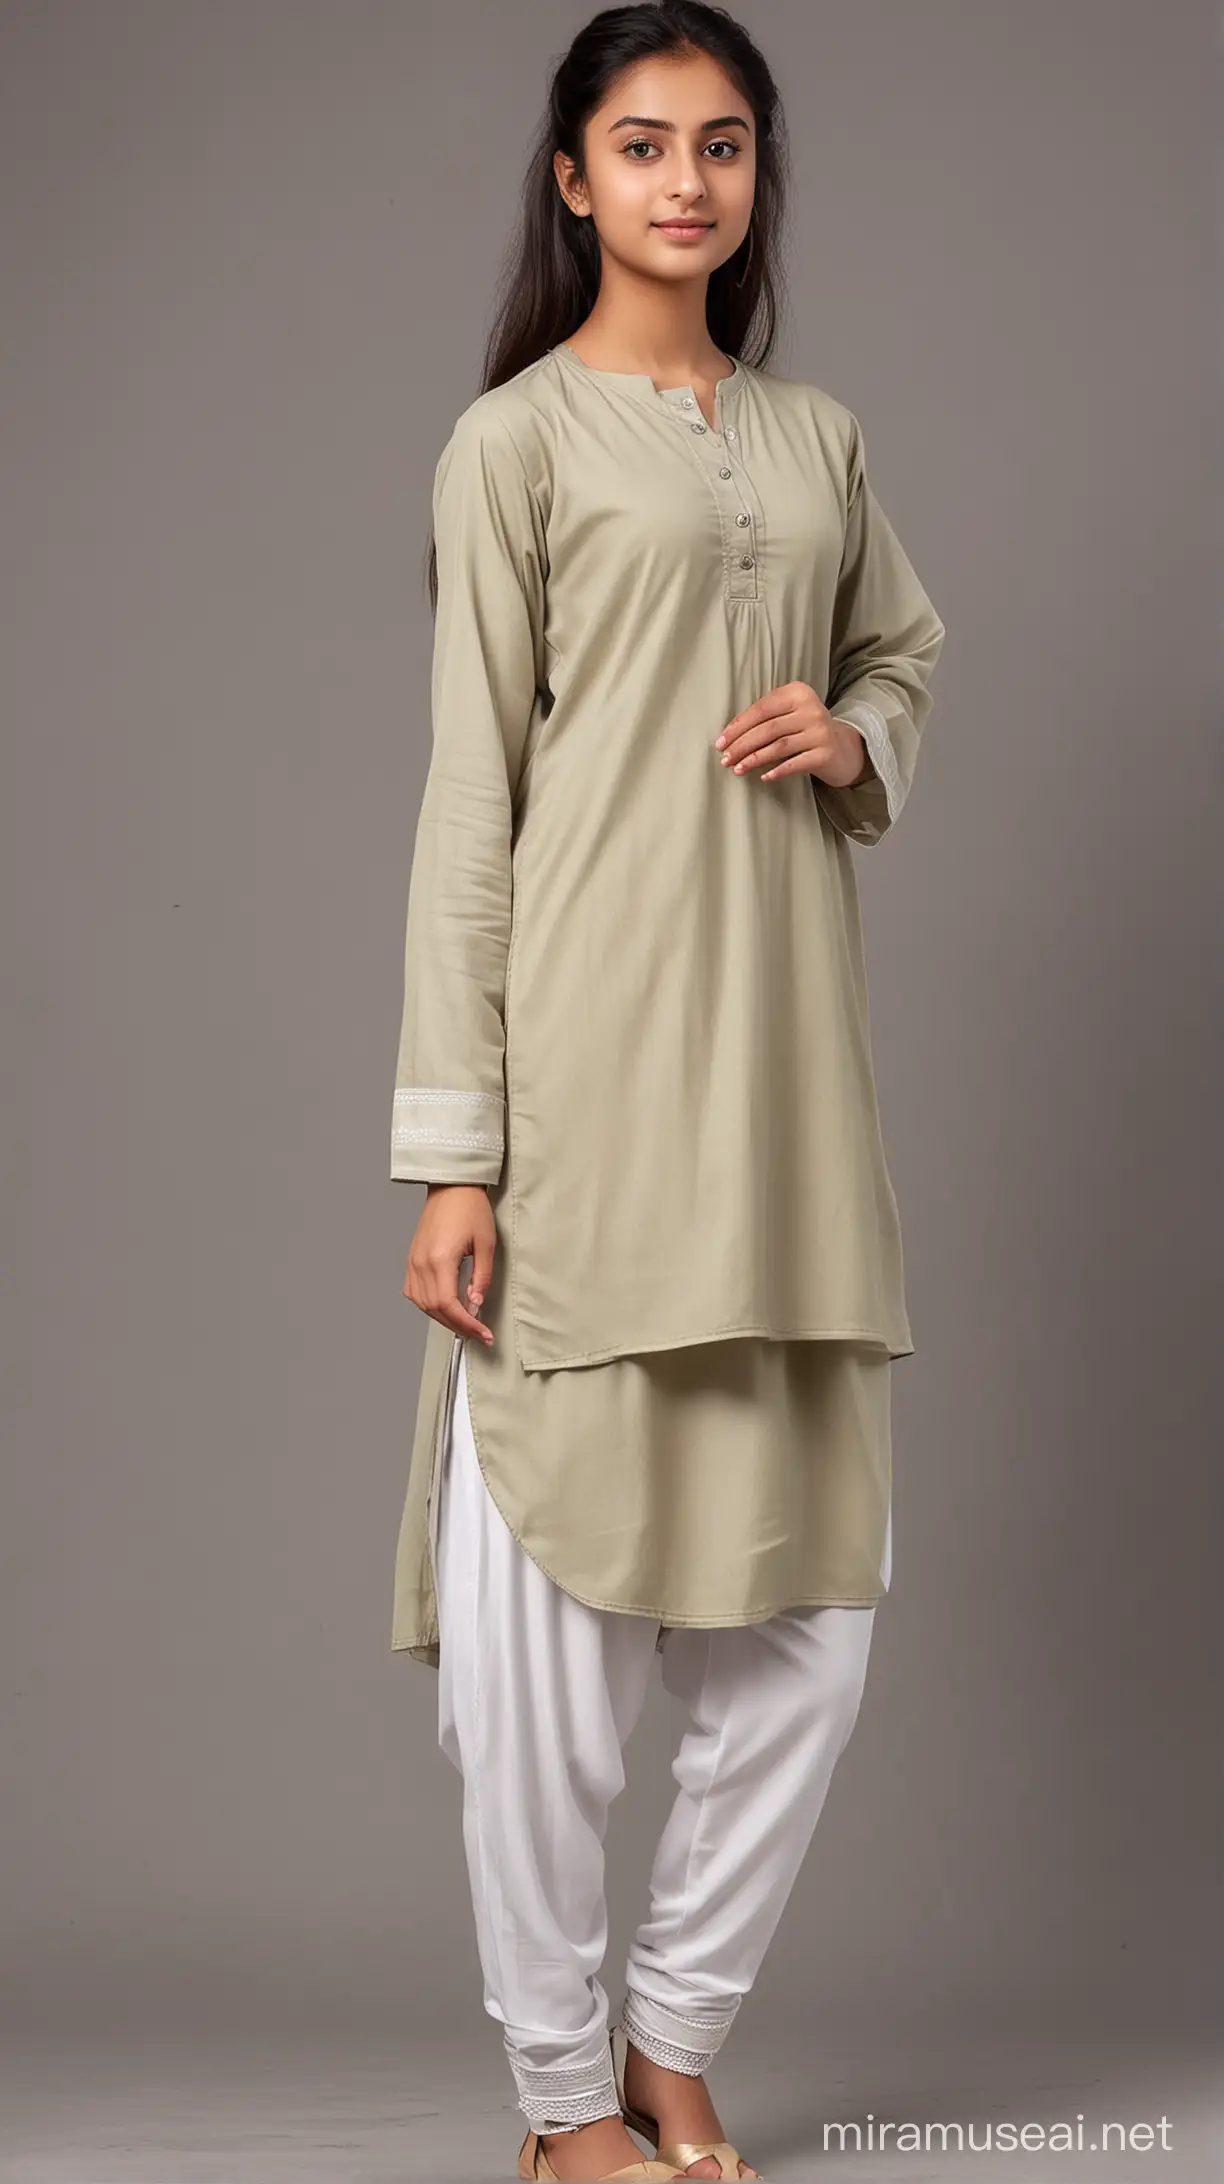 Young Adult School Girl in Khaki Kameez and White Shalwar Standing in Side Pose